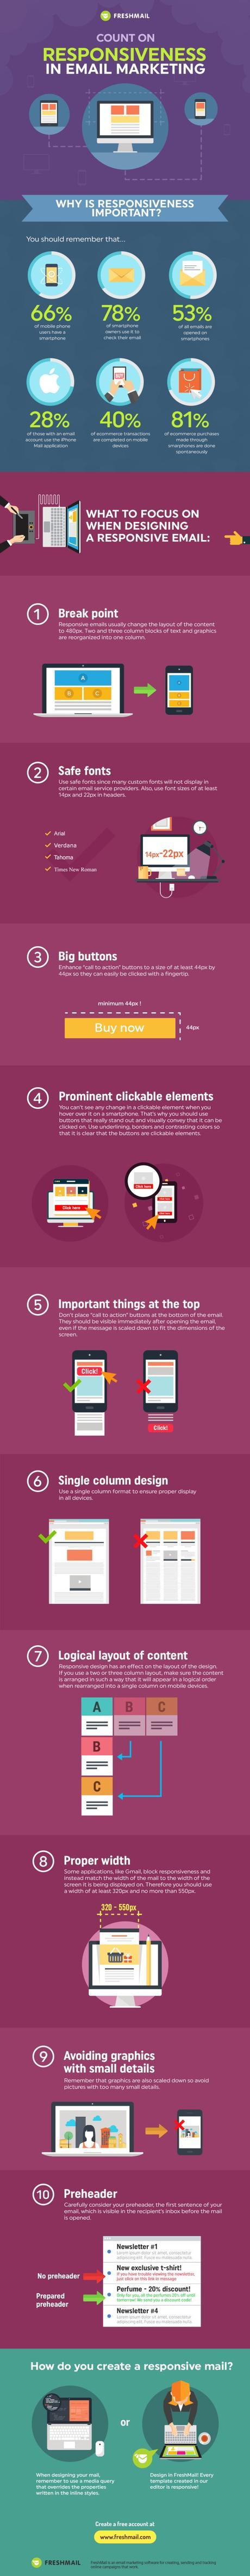 Make responsive email newsletters! #infographic